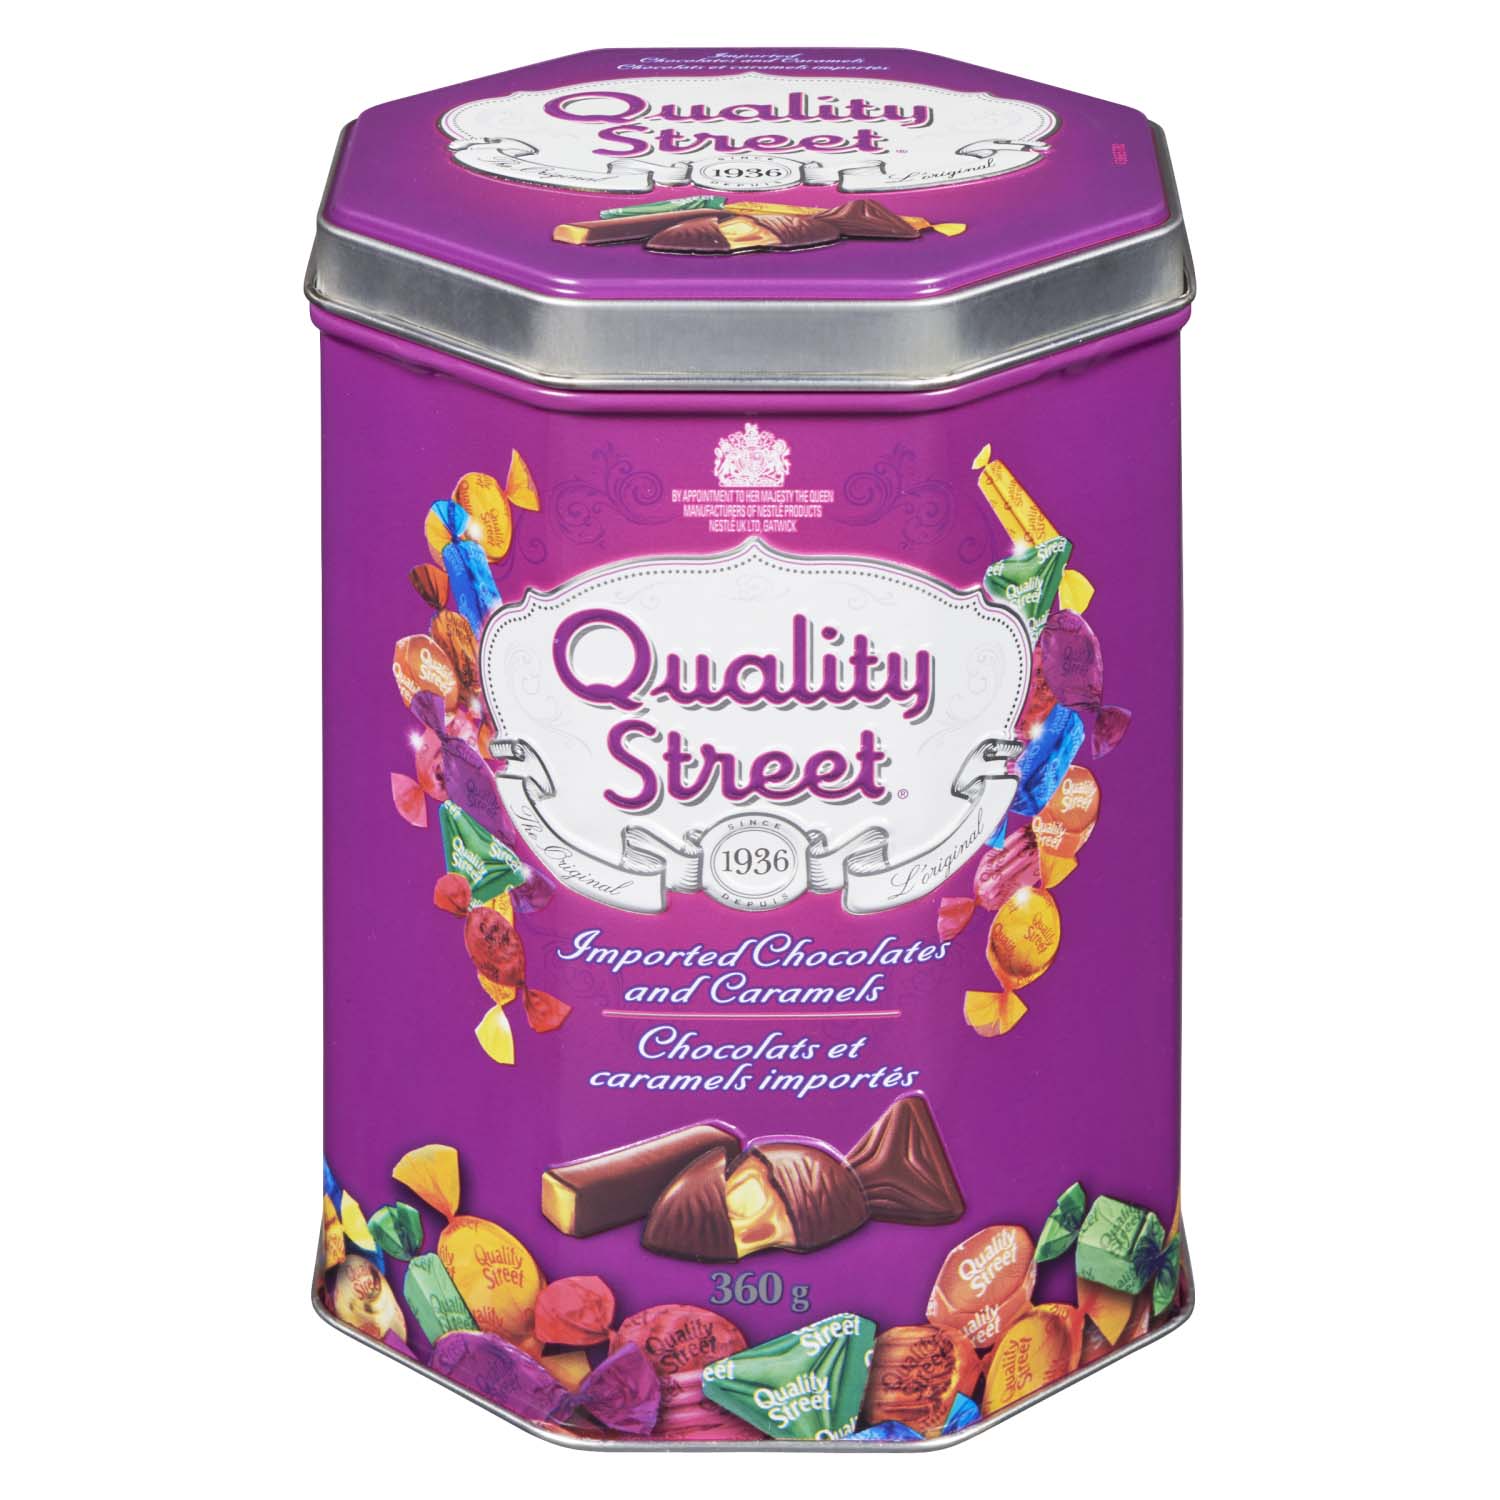 Quality Street Imported Chocolates and Caramels 360 g